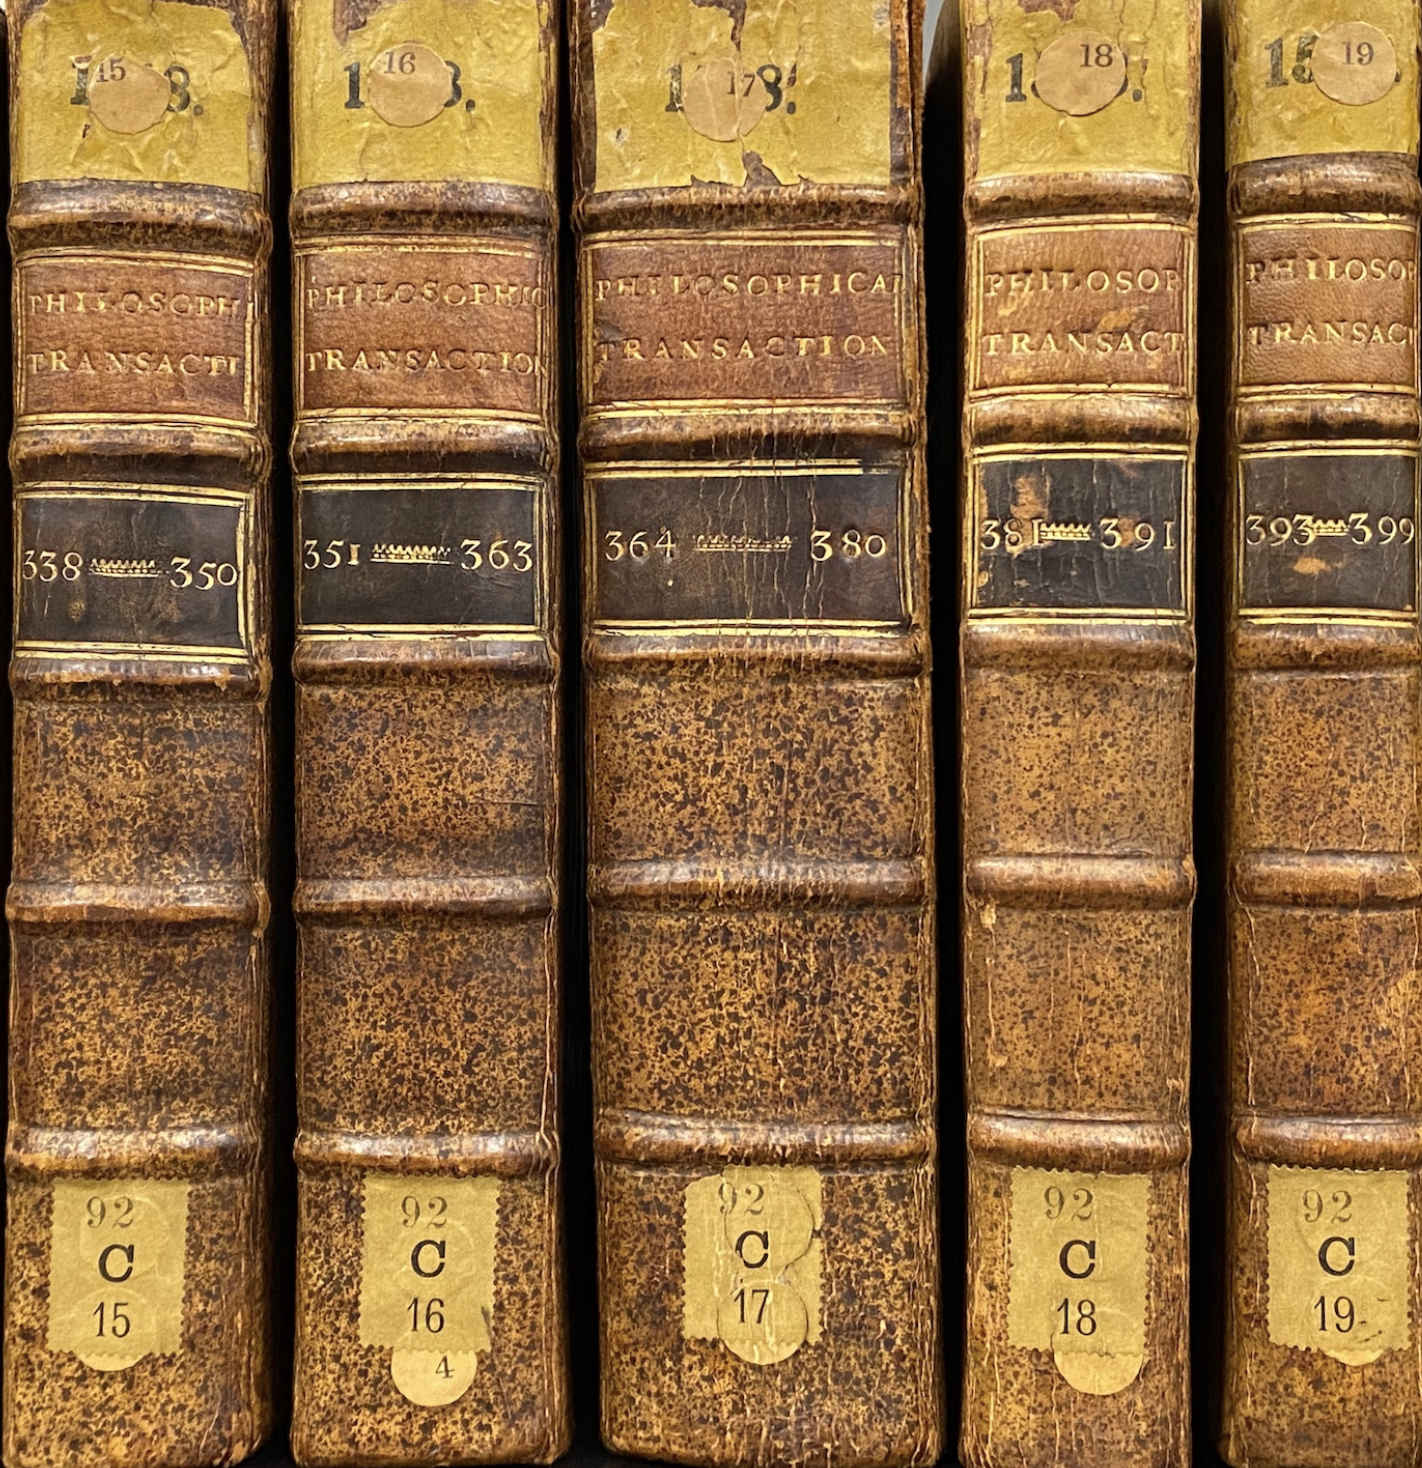 Photo of spines of 5 volumes of the Philosophical Transactions 